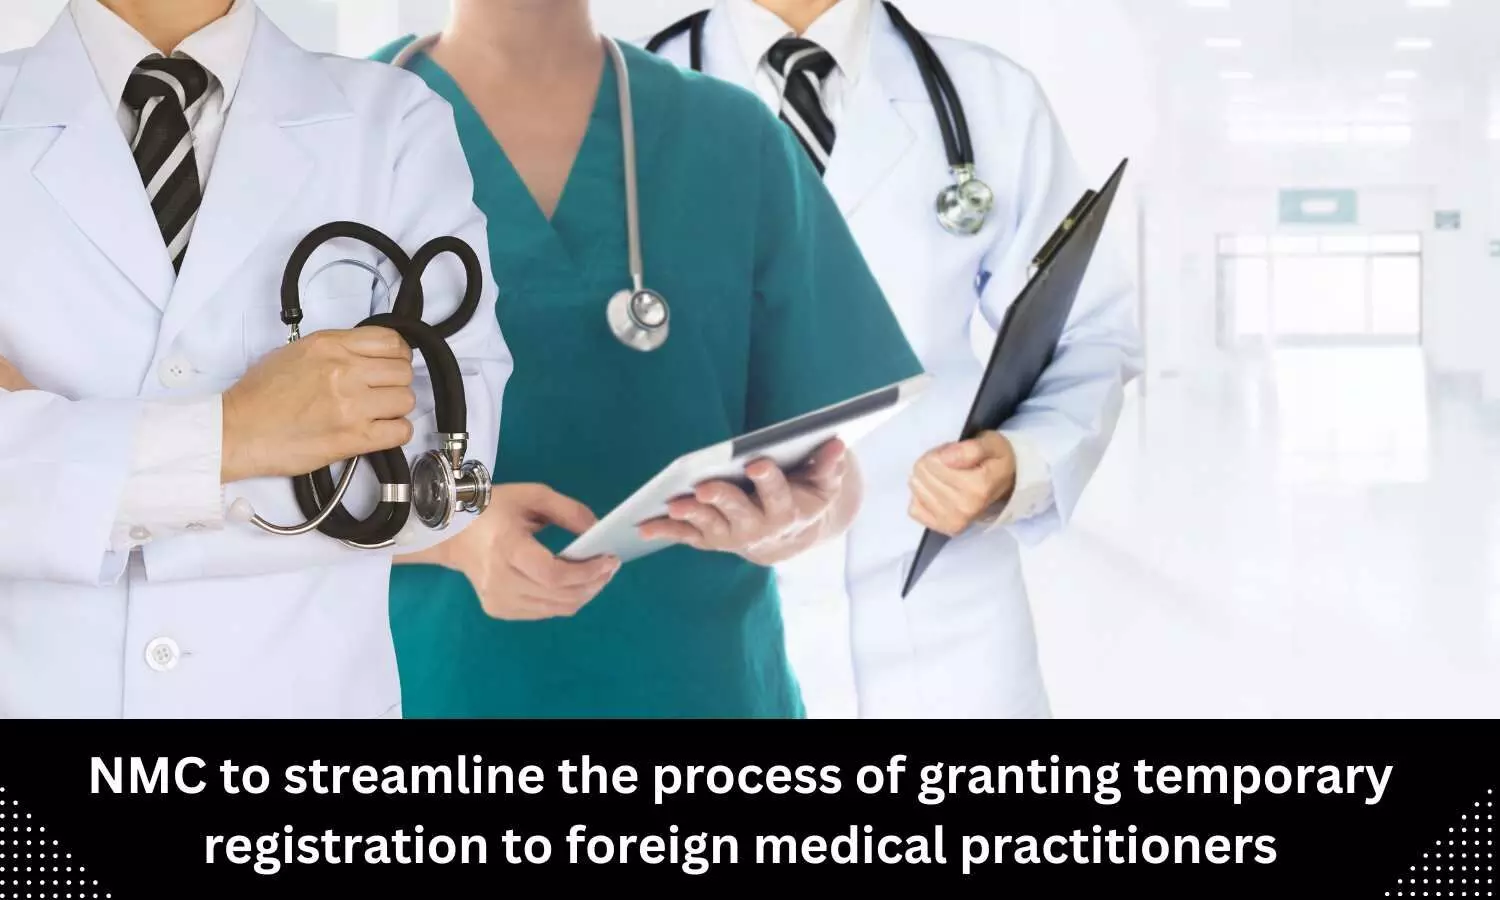 NMC to streamline process of granting temporary registration to foreign medical practitioners